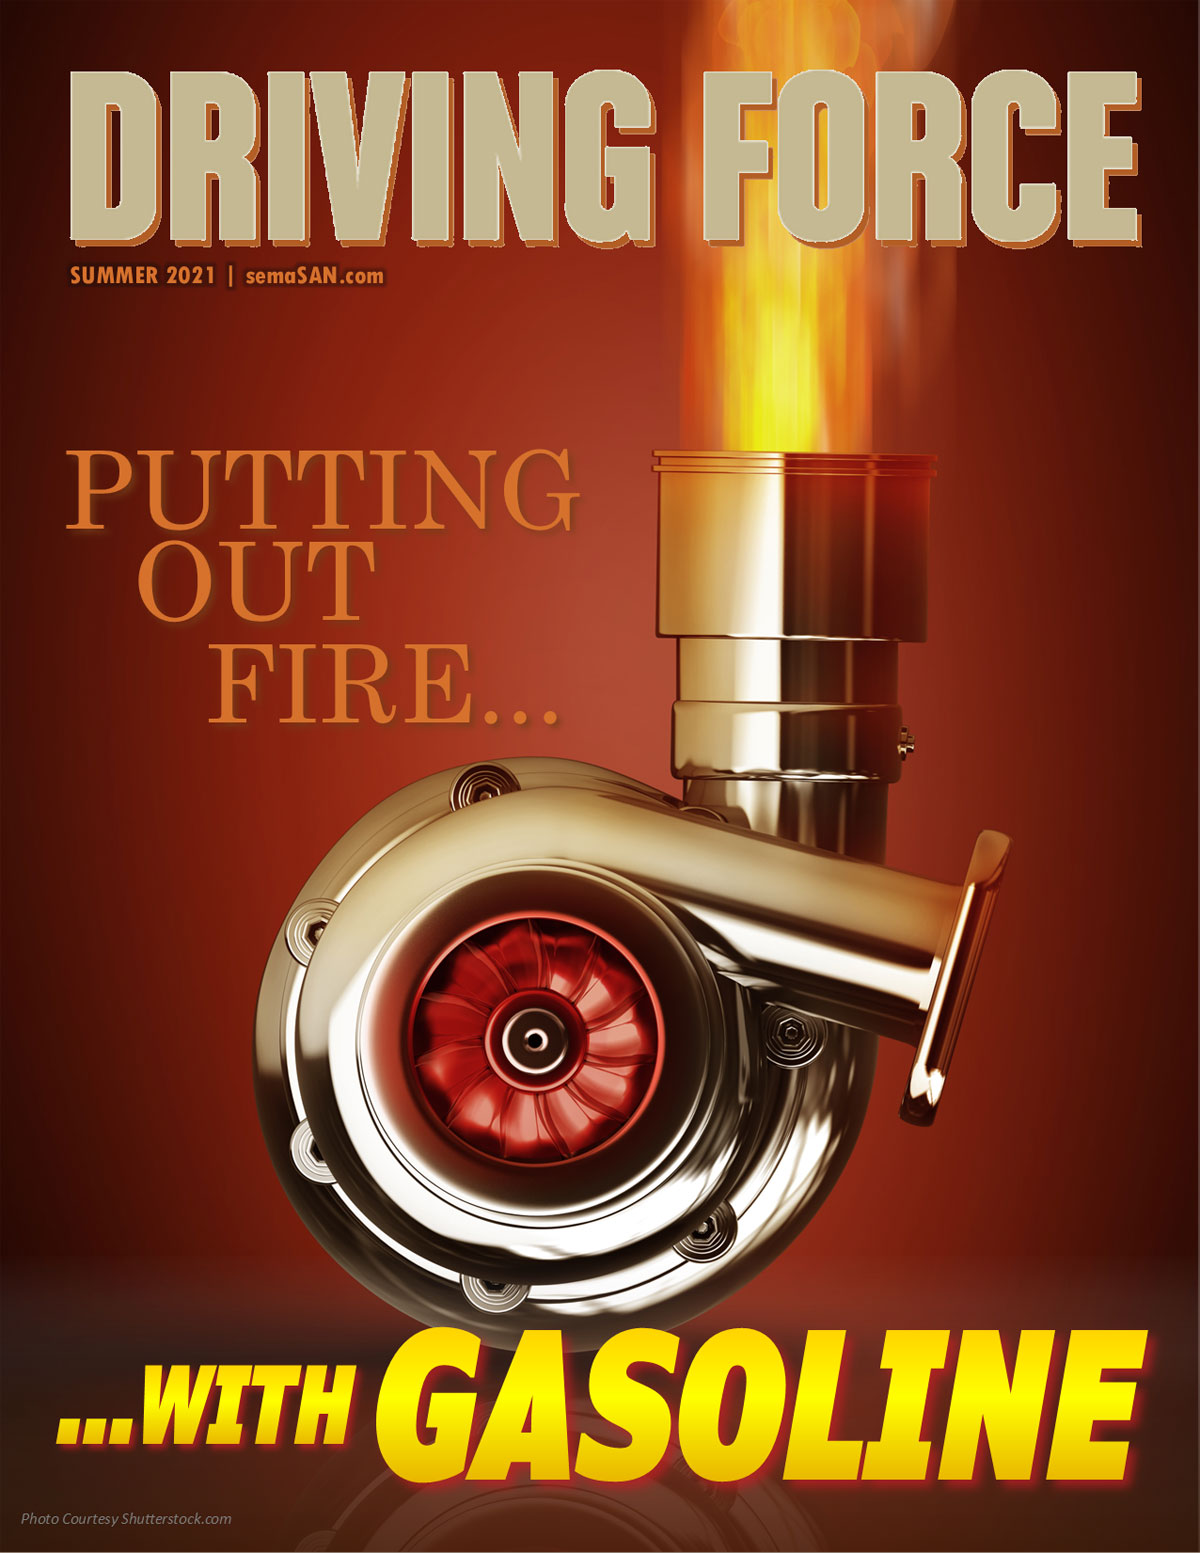 Current Issue of Driving Force, Summer 2021, SEMA Action Network